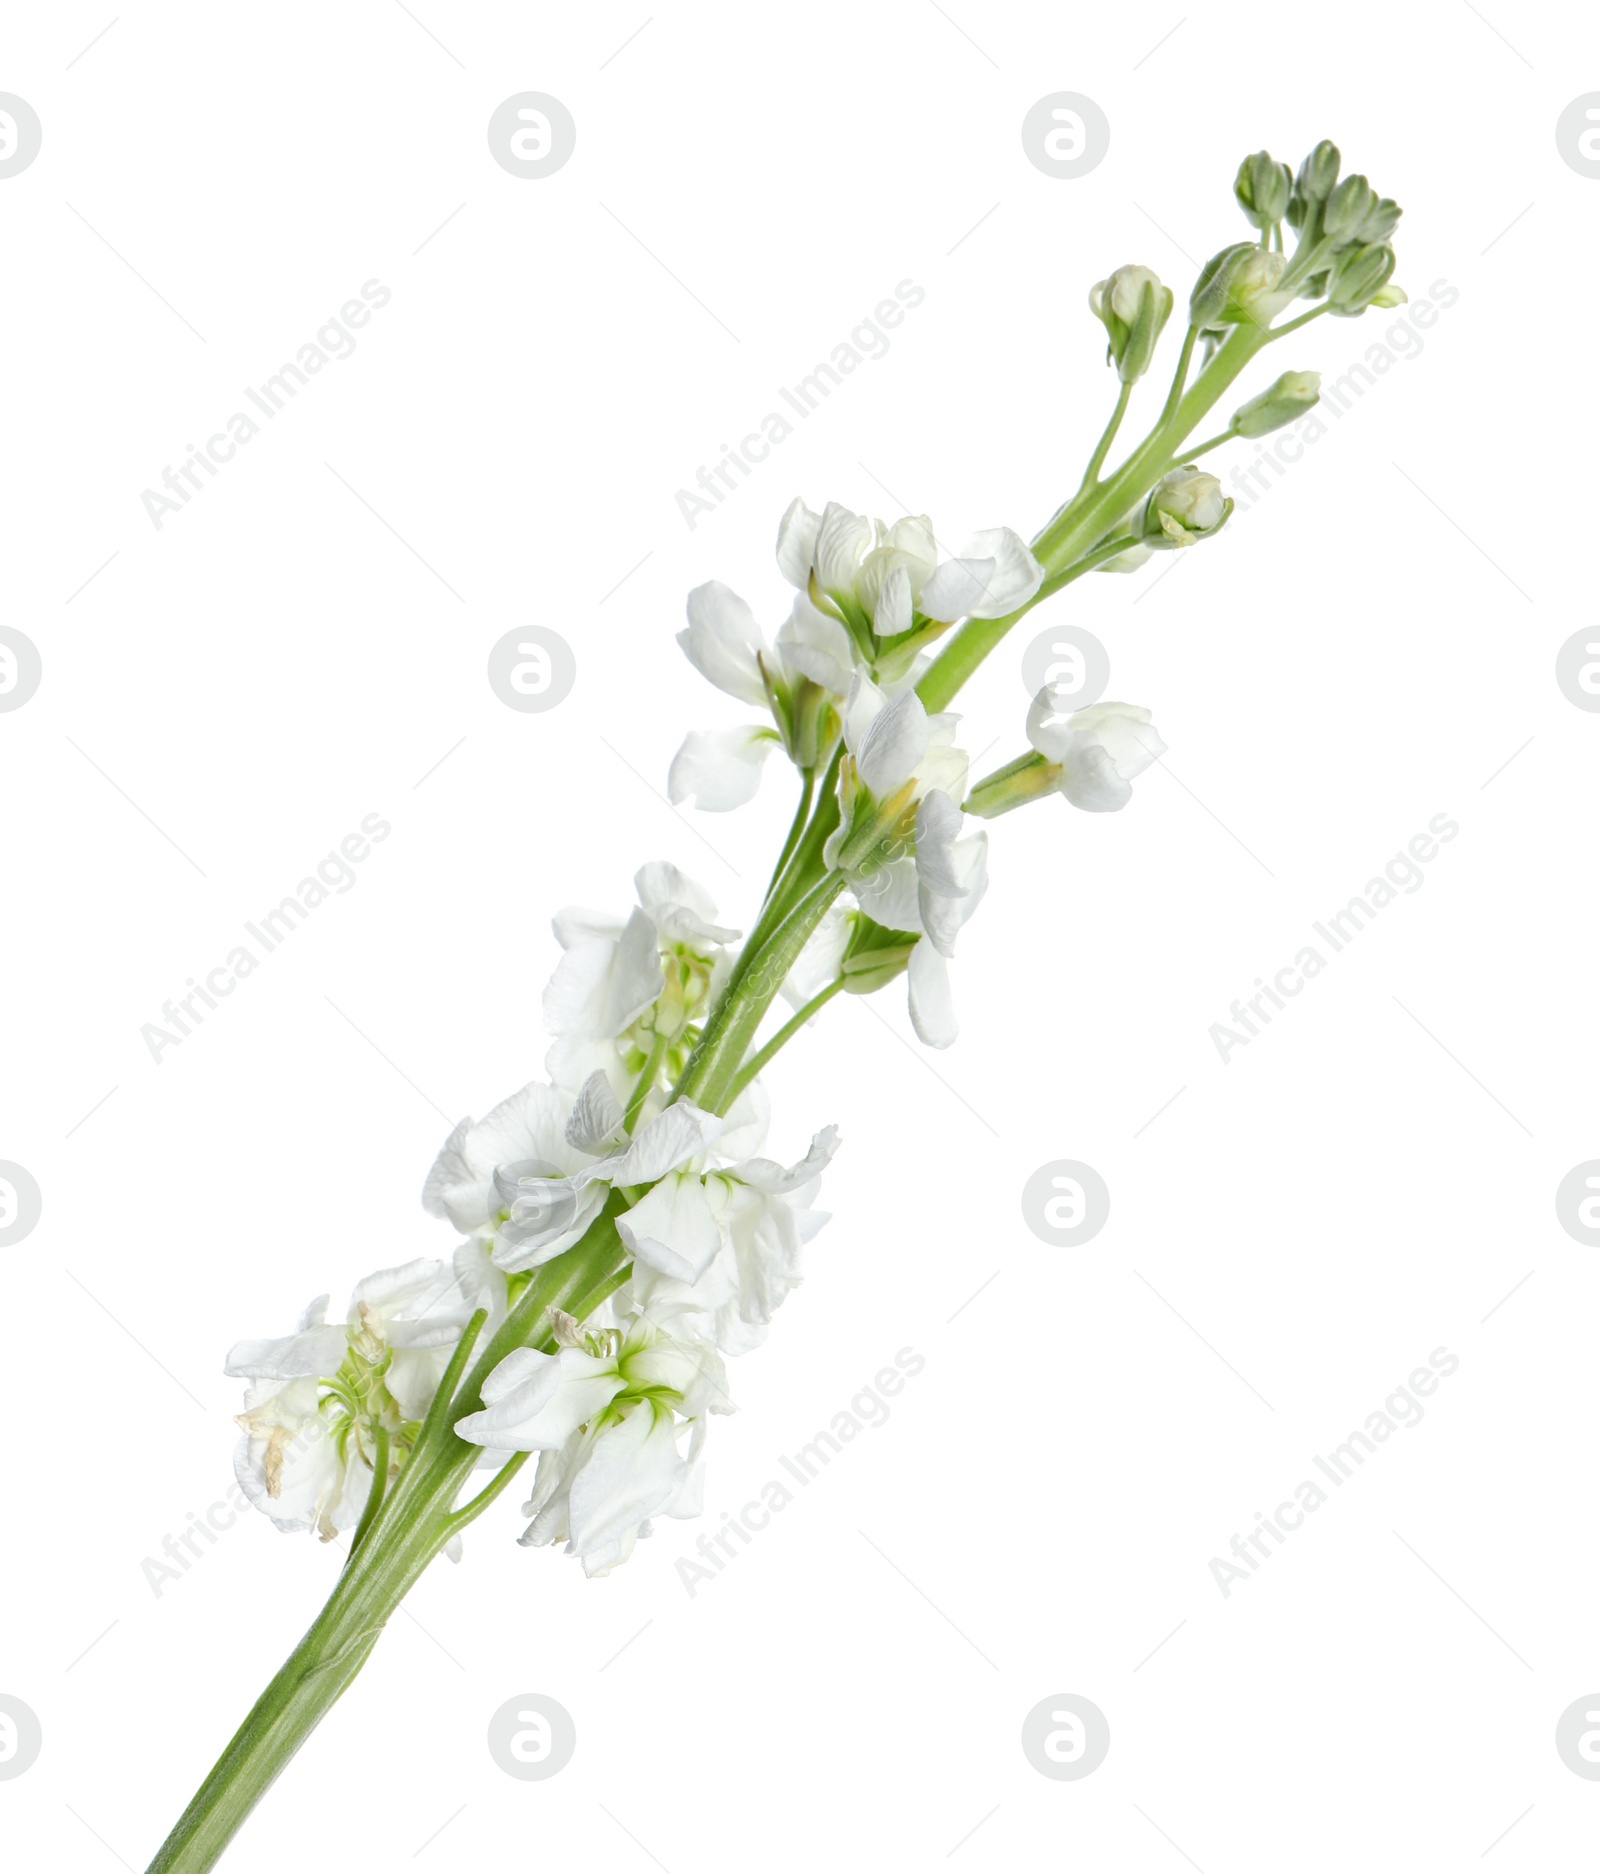 Photo of Beautiful stock flowers with tender petals isolated on white